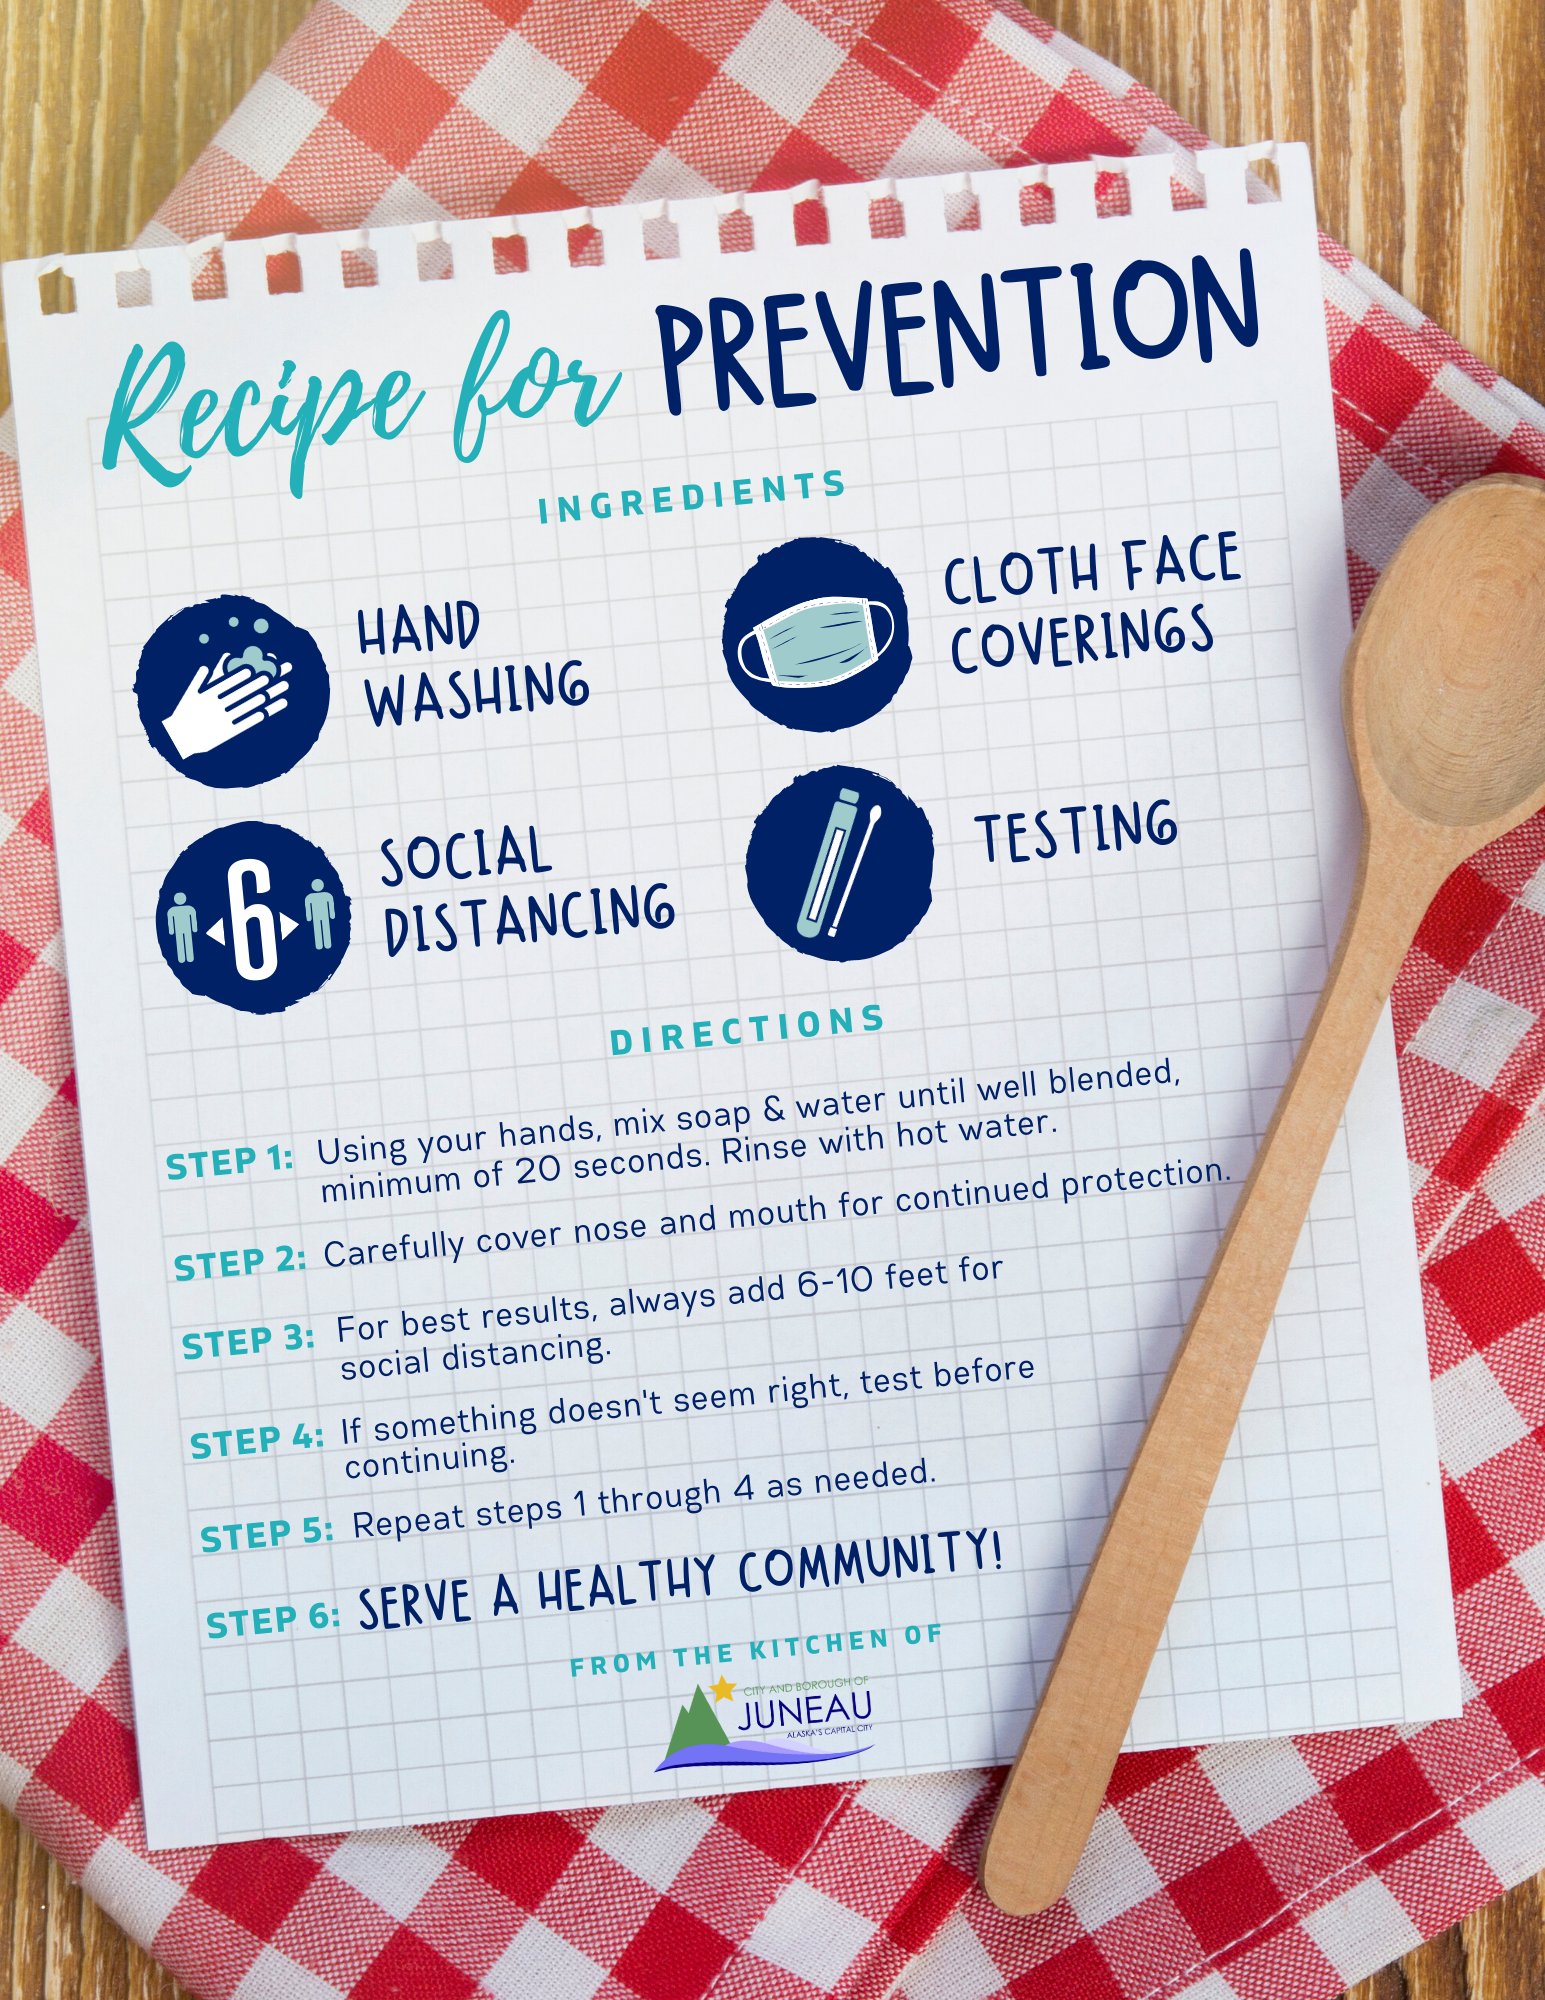 Click the image to view the Recipe for Prevention